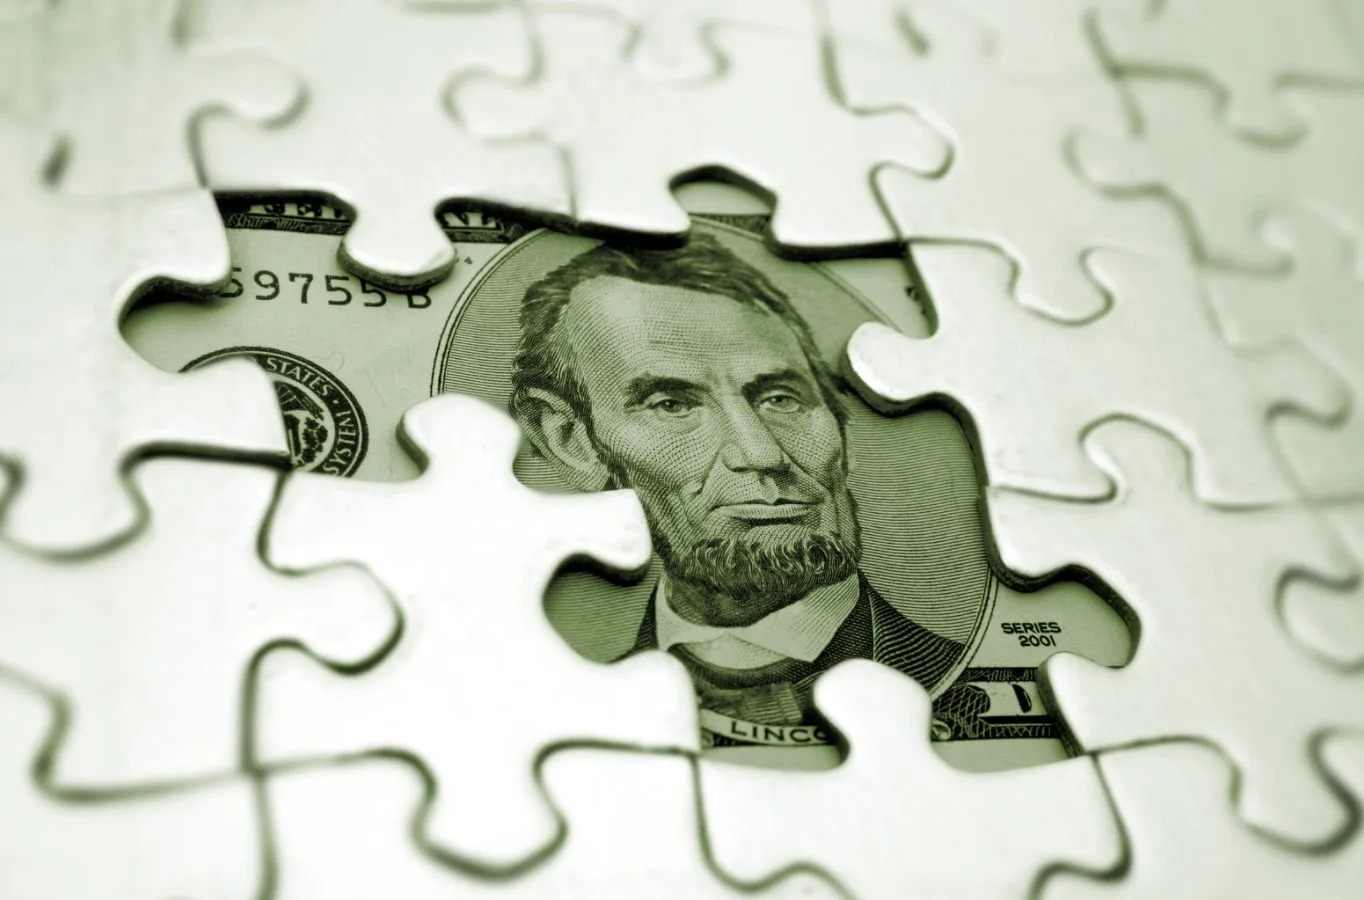 Lincoln's face on the five dollar bill shows from underneath an incomplete puzzle